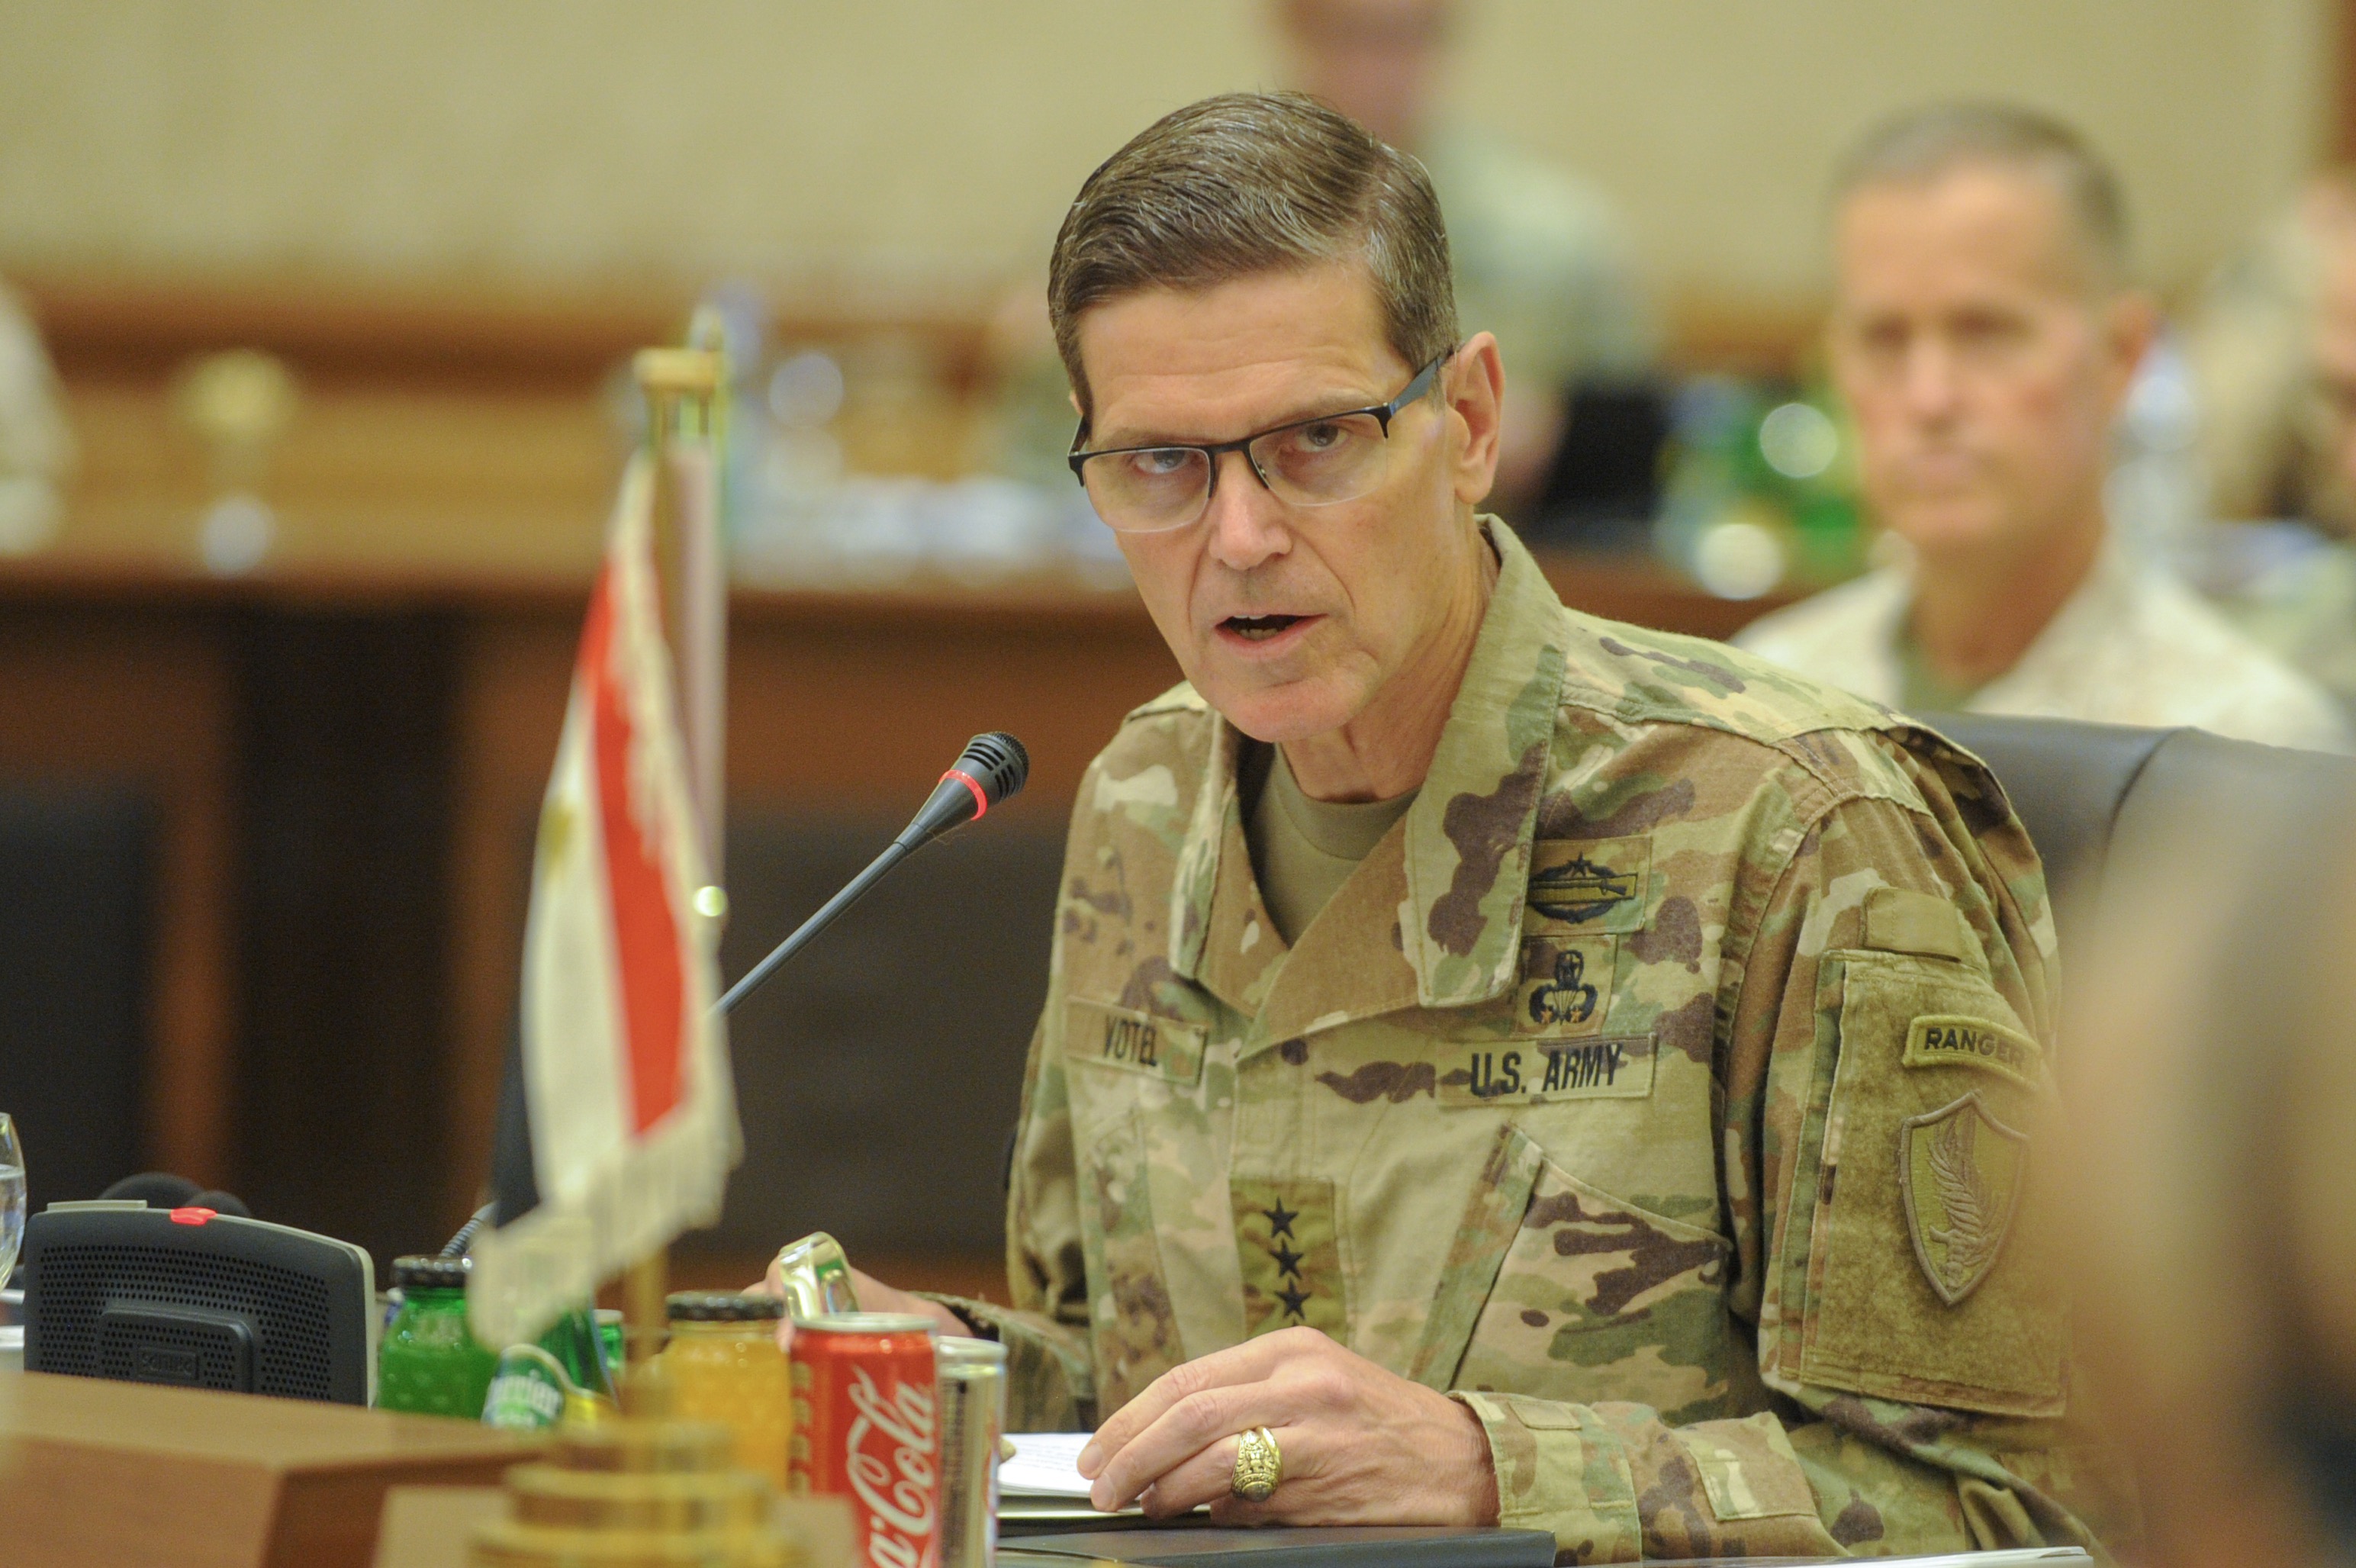 The Commander of the US Central Command, General Joseph Votel